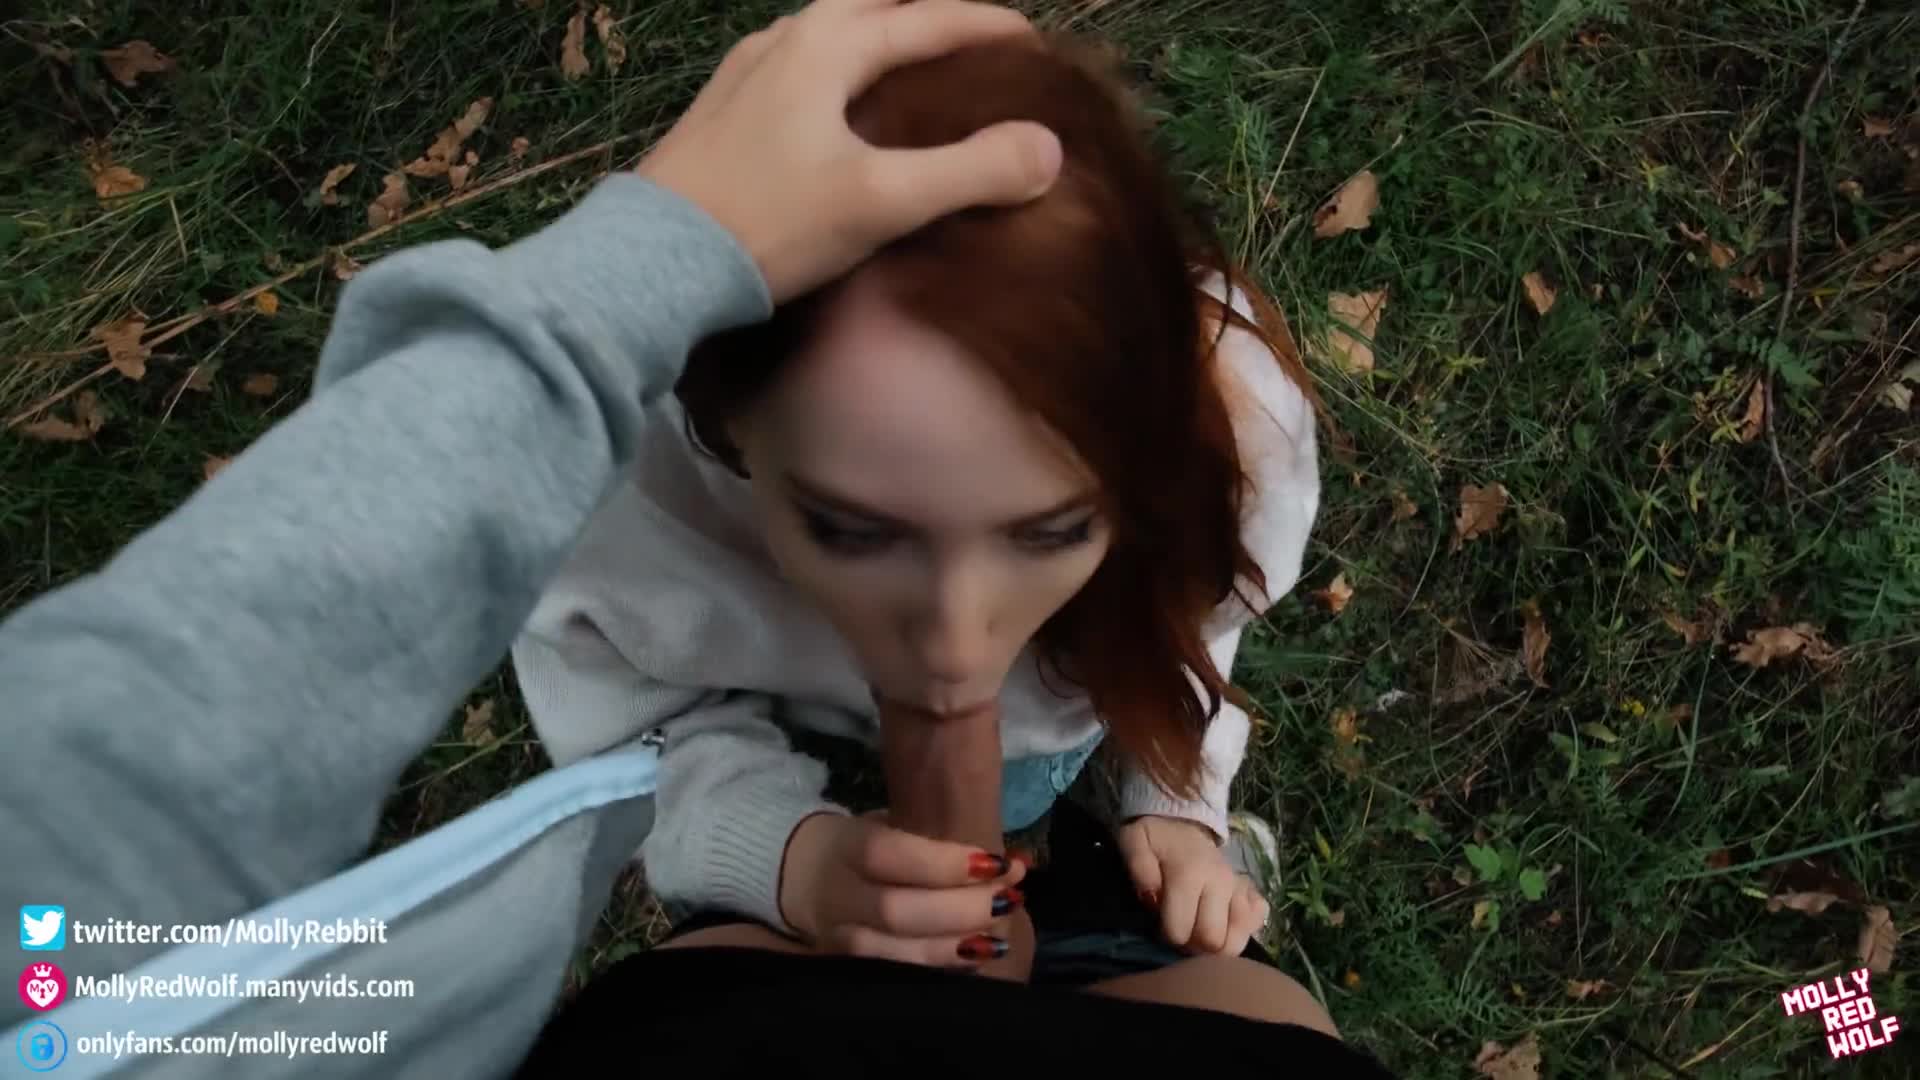 Redhead whore Molly Red Wolf is fucked in the forest like an animal by her boyfriend - Videos - Big Ass Monster porn